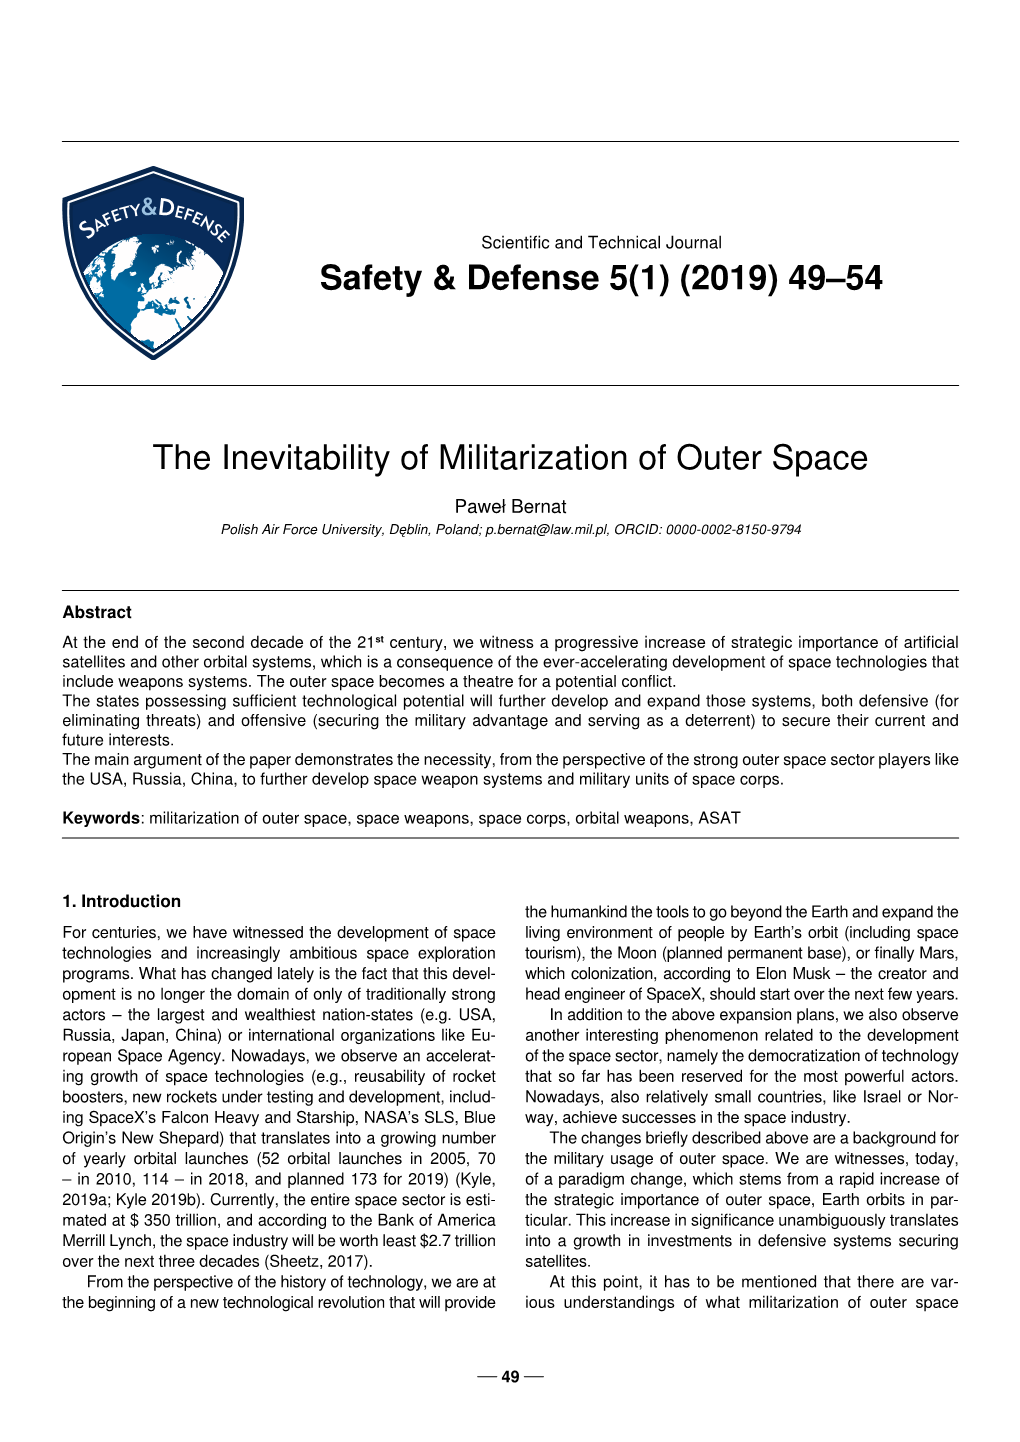 The Inevitability of Militarization of Outer Space